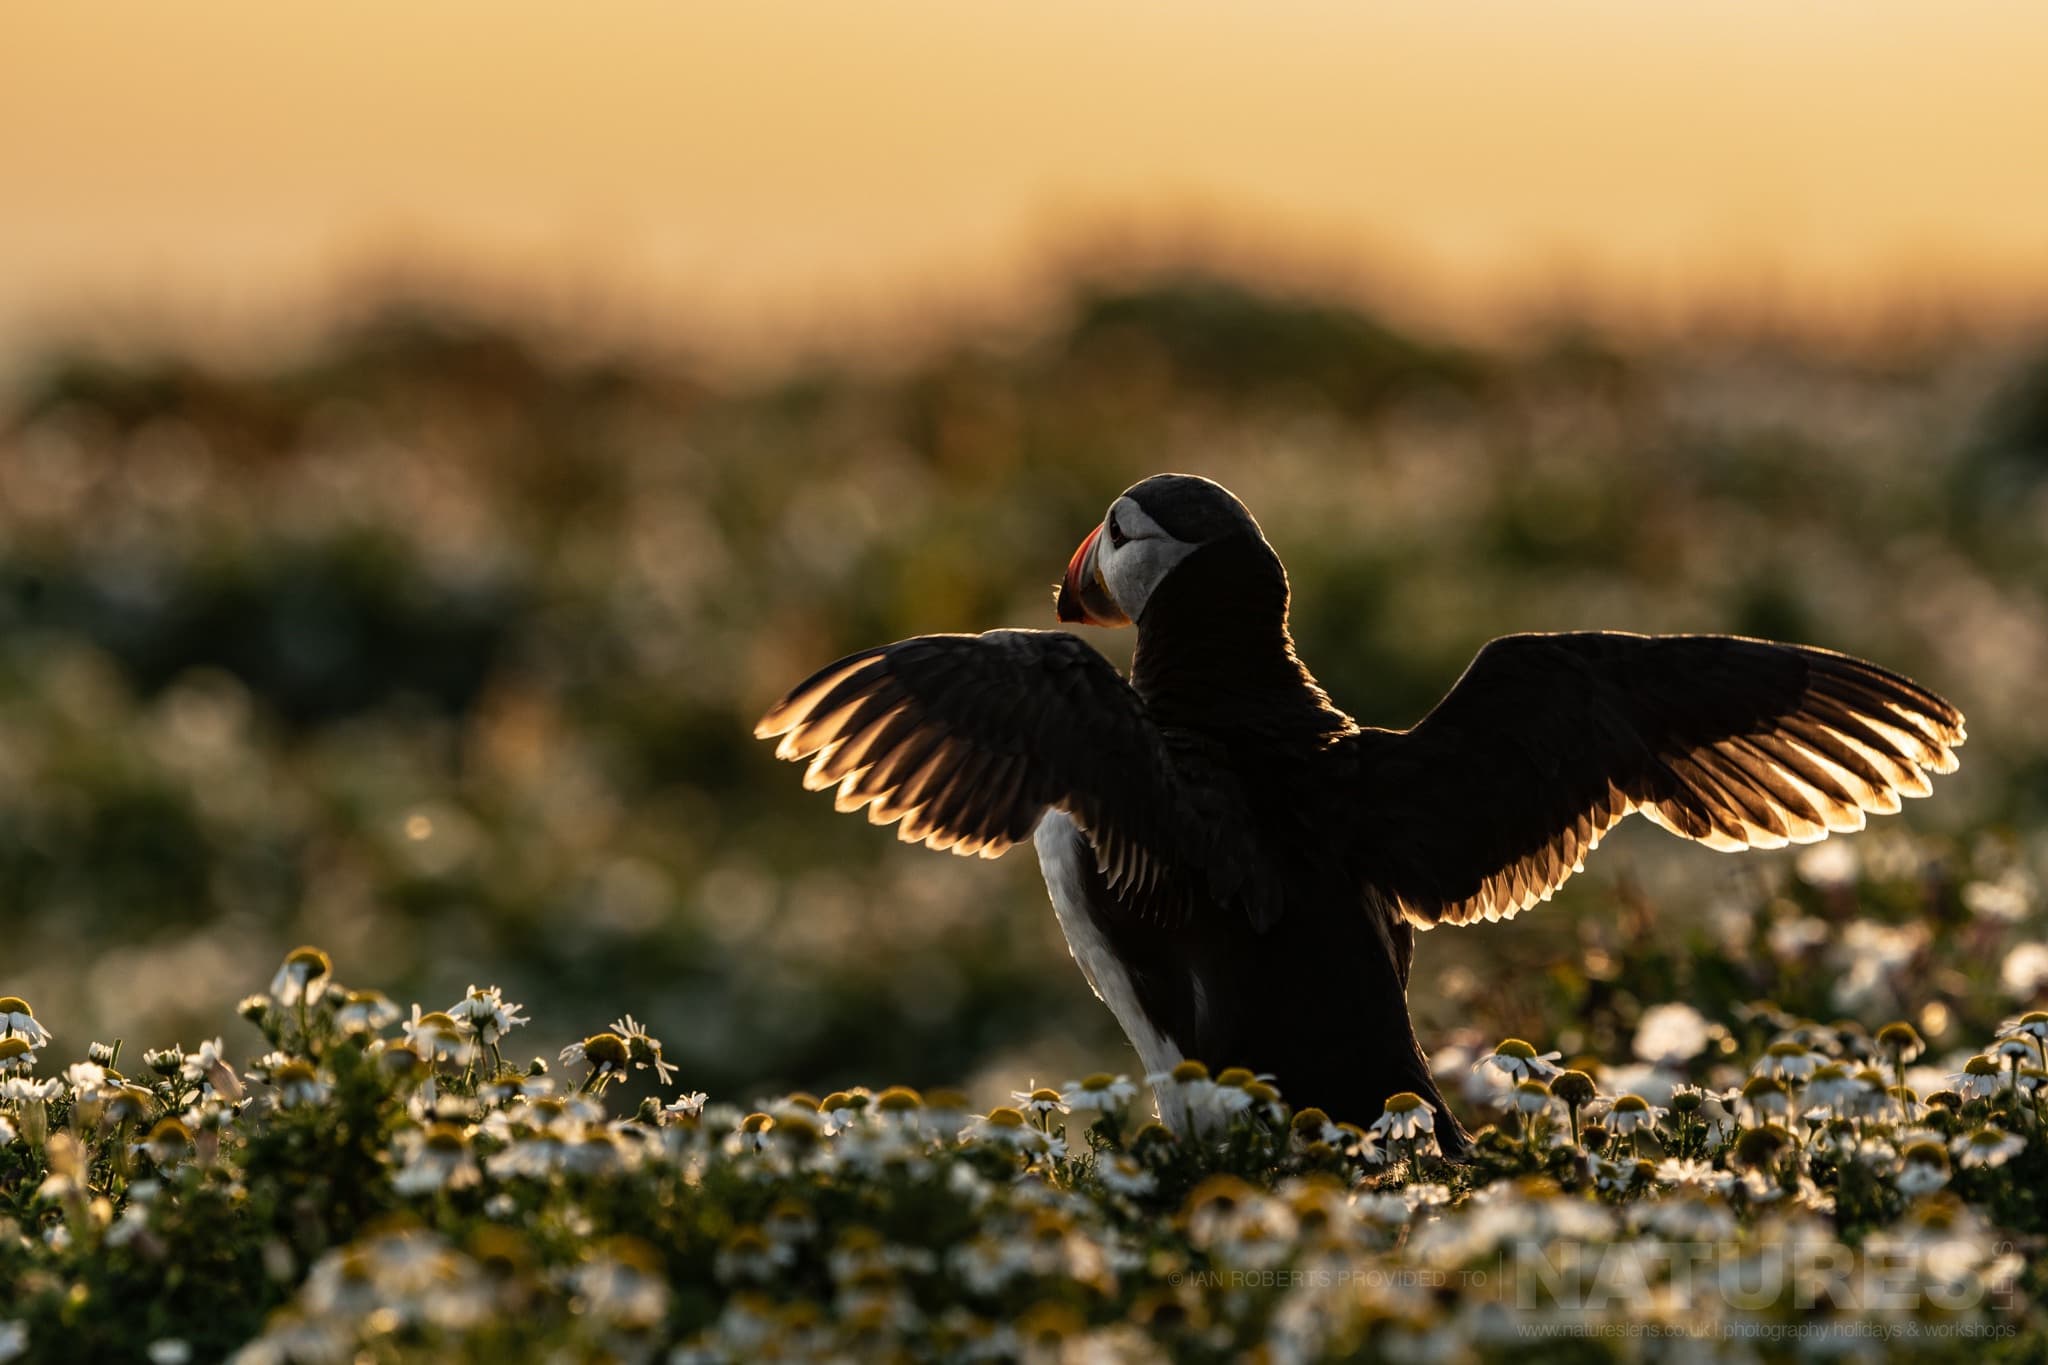 A Puffin Stretches Its Wings, Illuminated From Behind By The Light Of The Rising Sun 